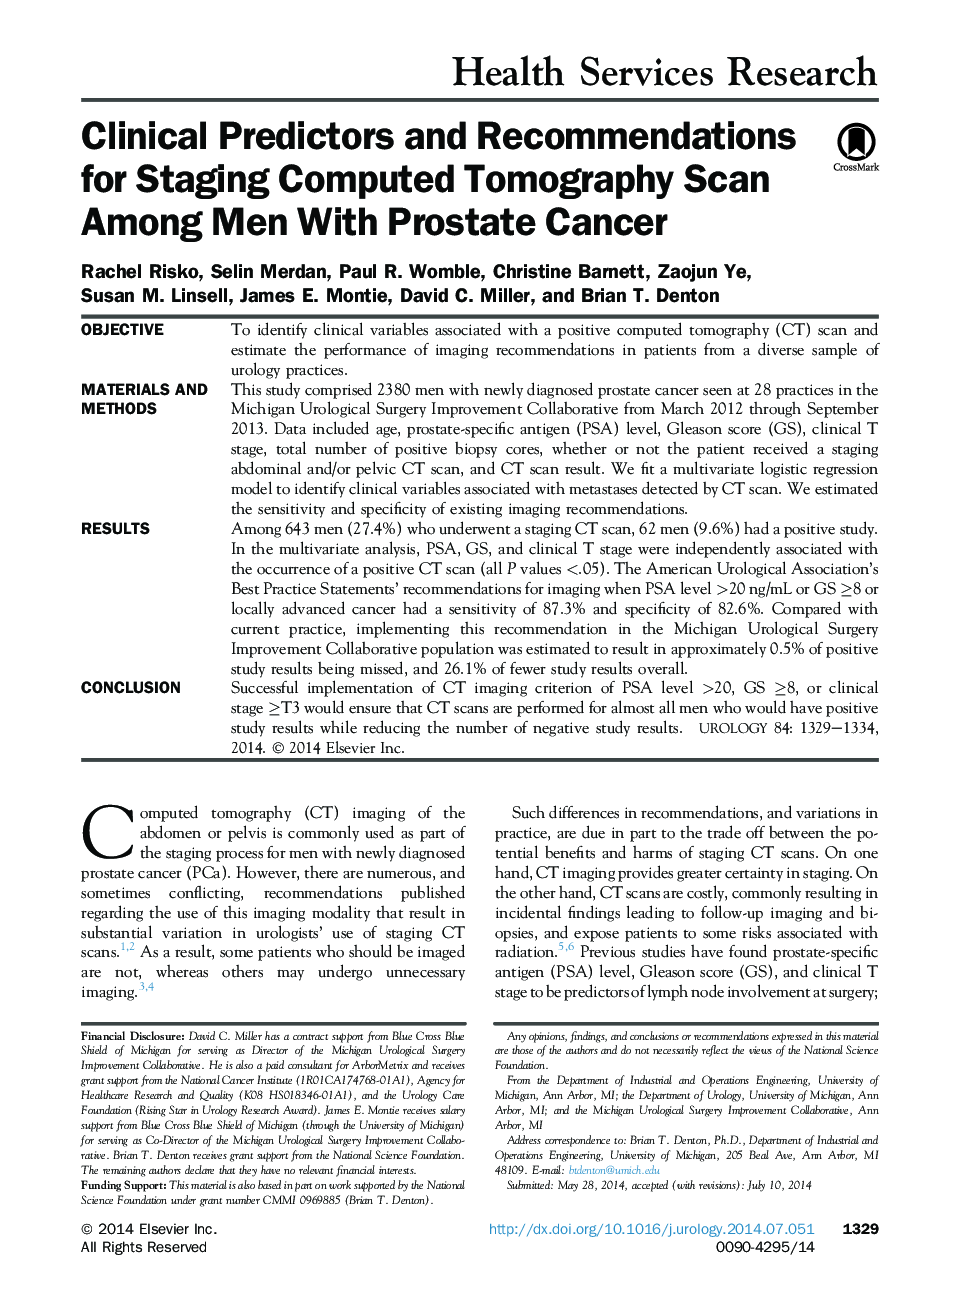 Clinical Predictors and Recommendations for Staging Computed Tomography Scan Among Men With Prostate Cancer 